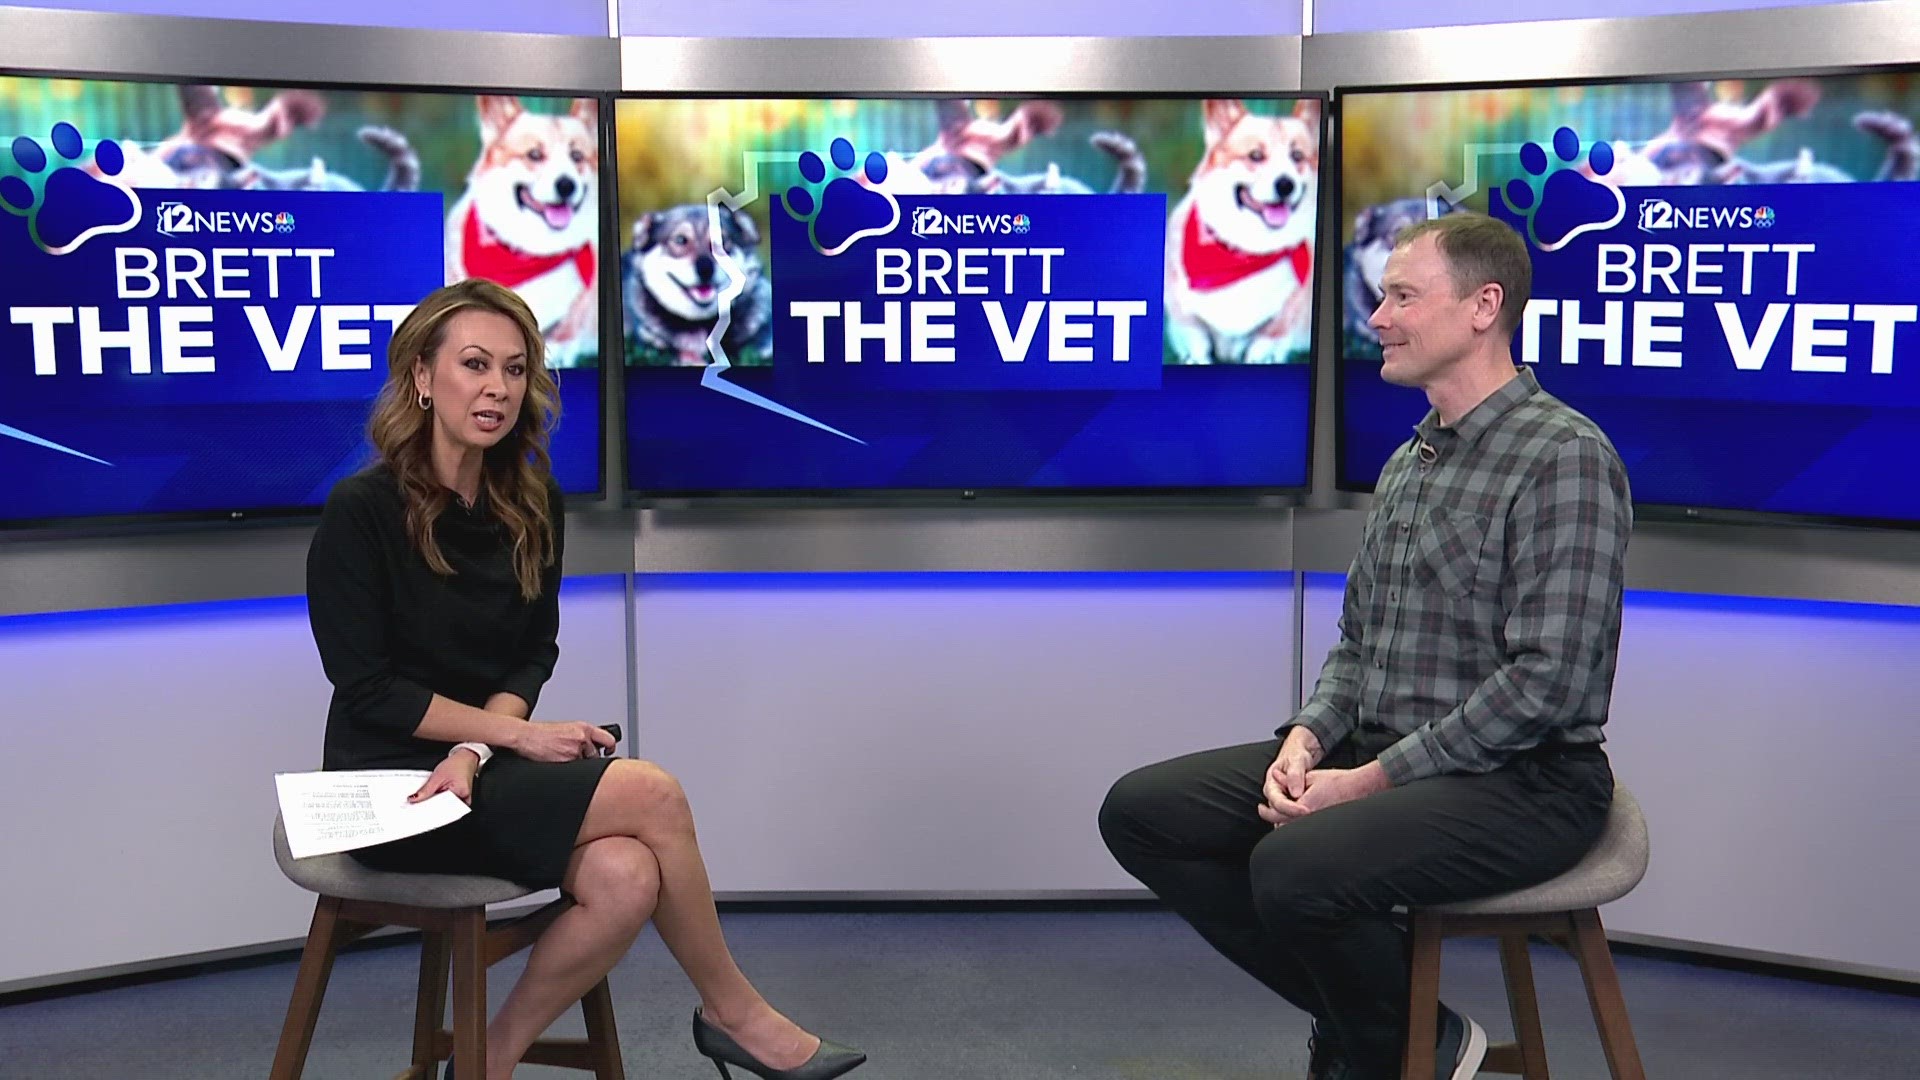 Brett the Vet is in studio at 12News give more insight into the mystery dog illness and offering tips to keep your fur babies safe.